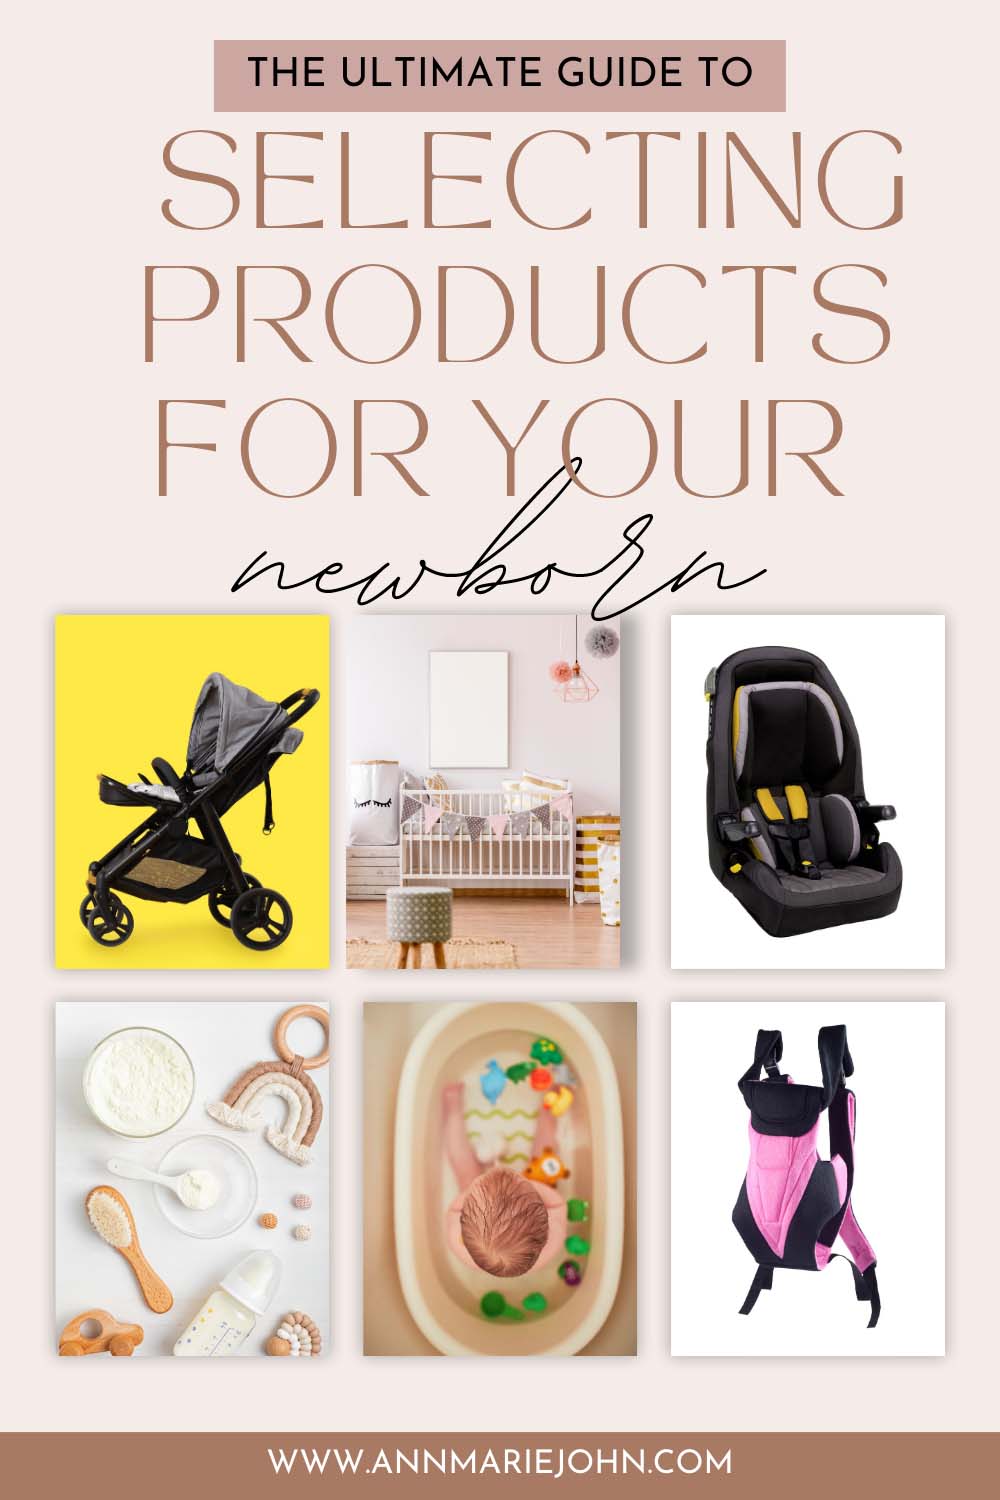 Selecting Products for Your Newborn